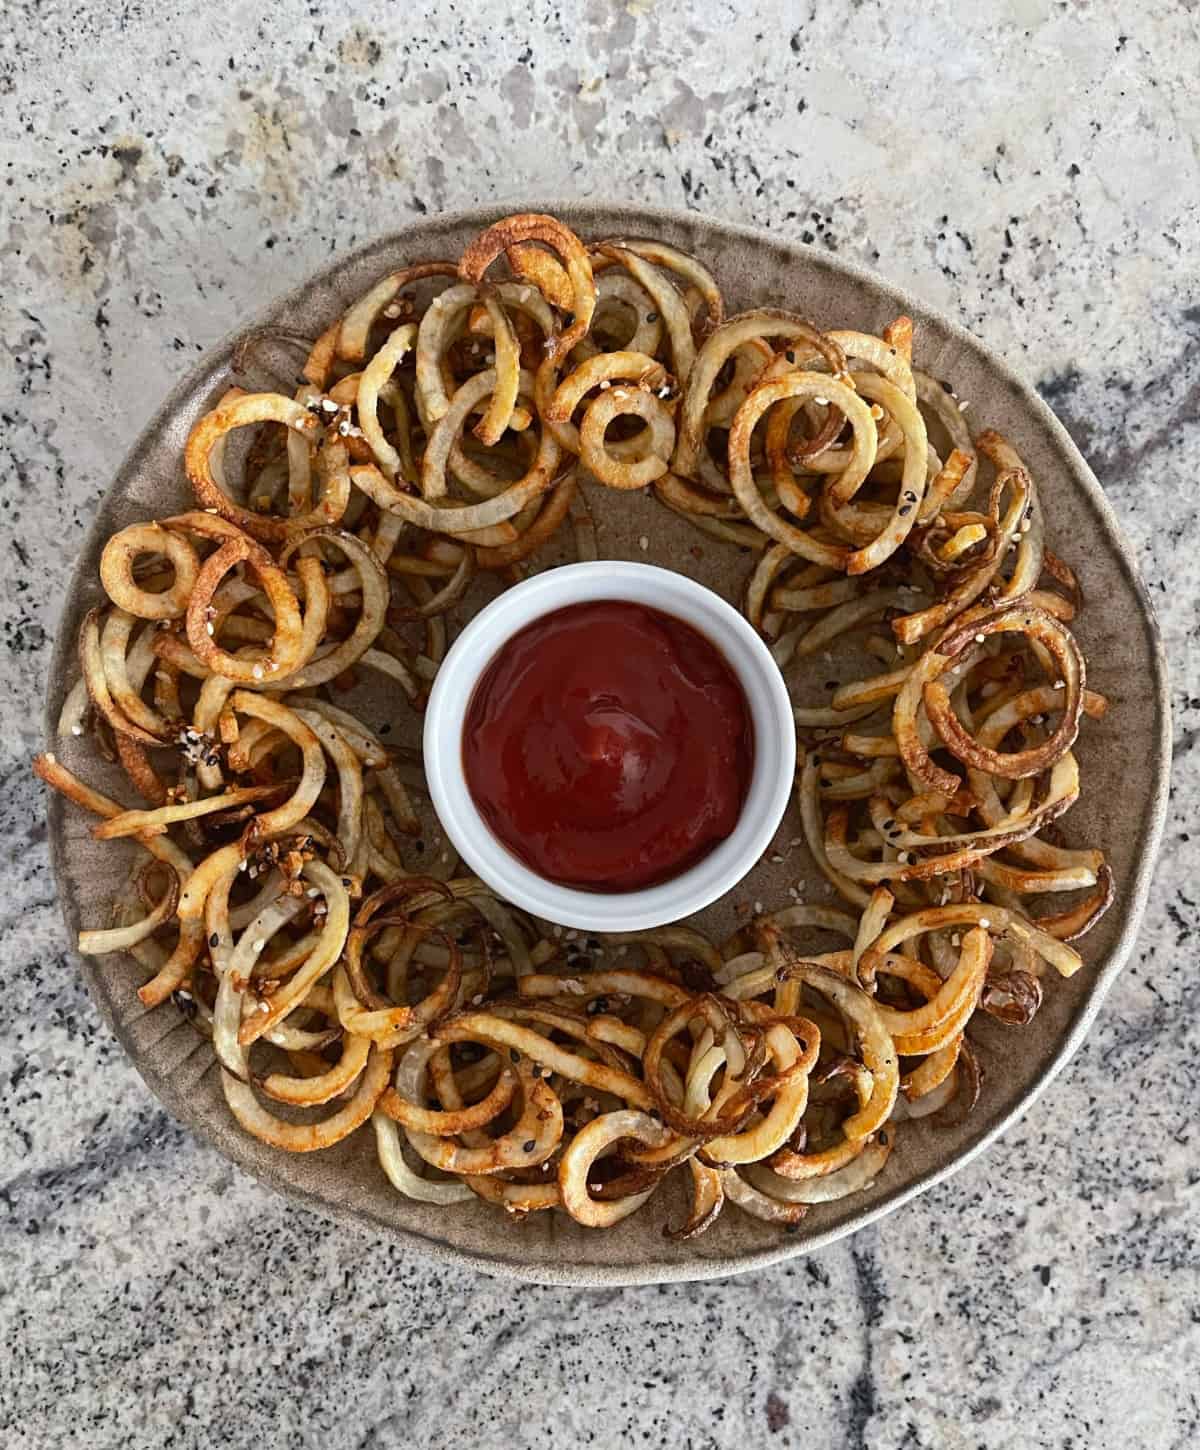 Everything bagel seasoned air fryer curly fries on plate with no sugar added ketchup.